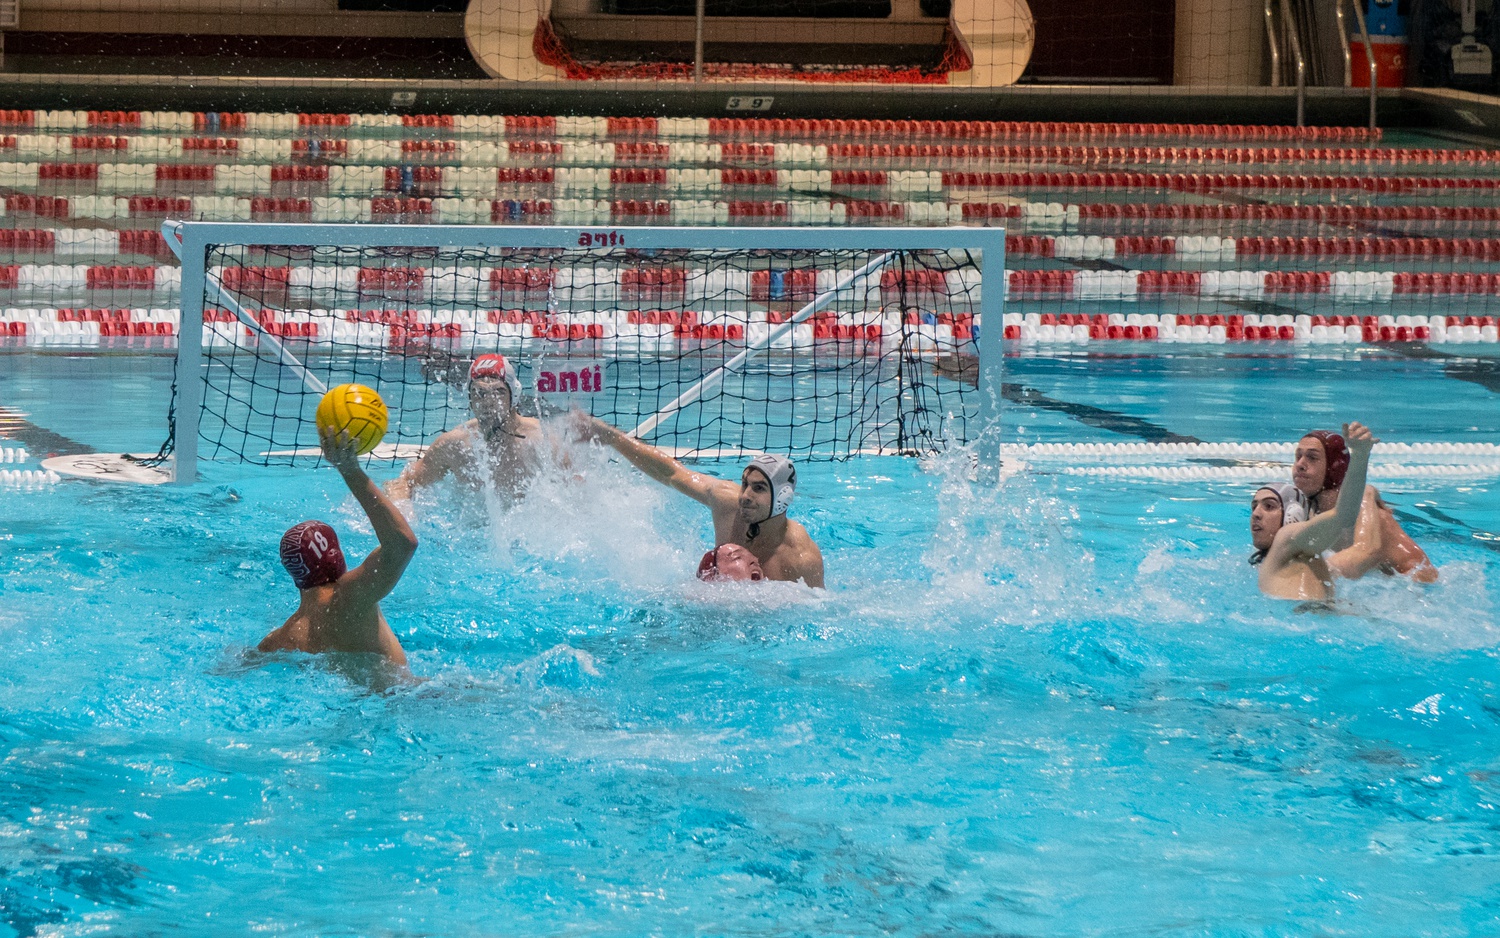 The Harvard offensive attack sets up on September 5, 2021 at home at Blodgett Pool against Wagner.